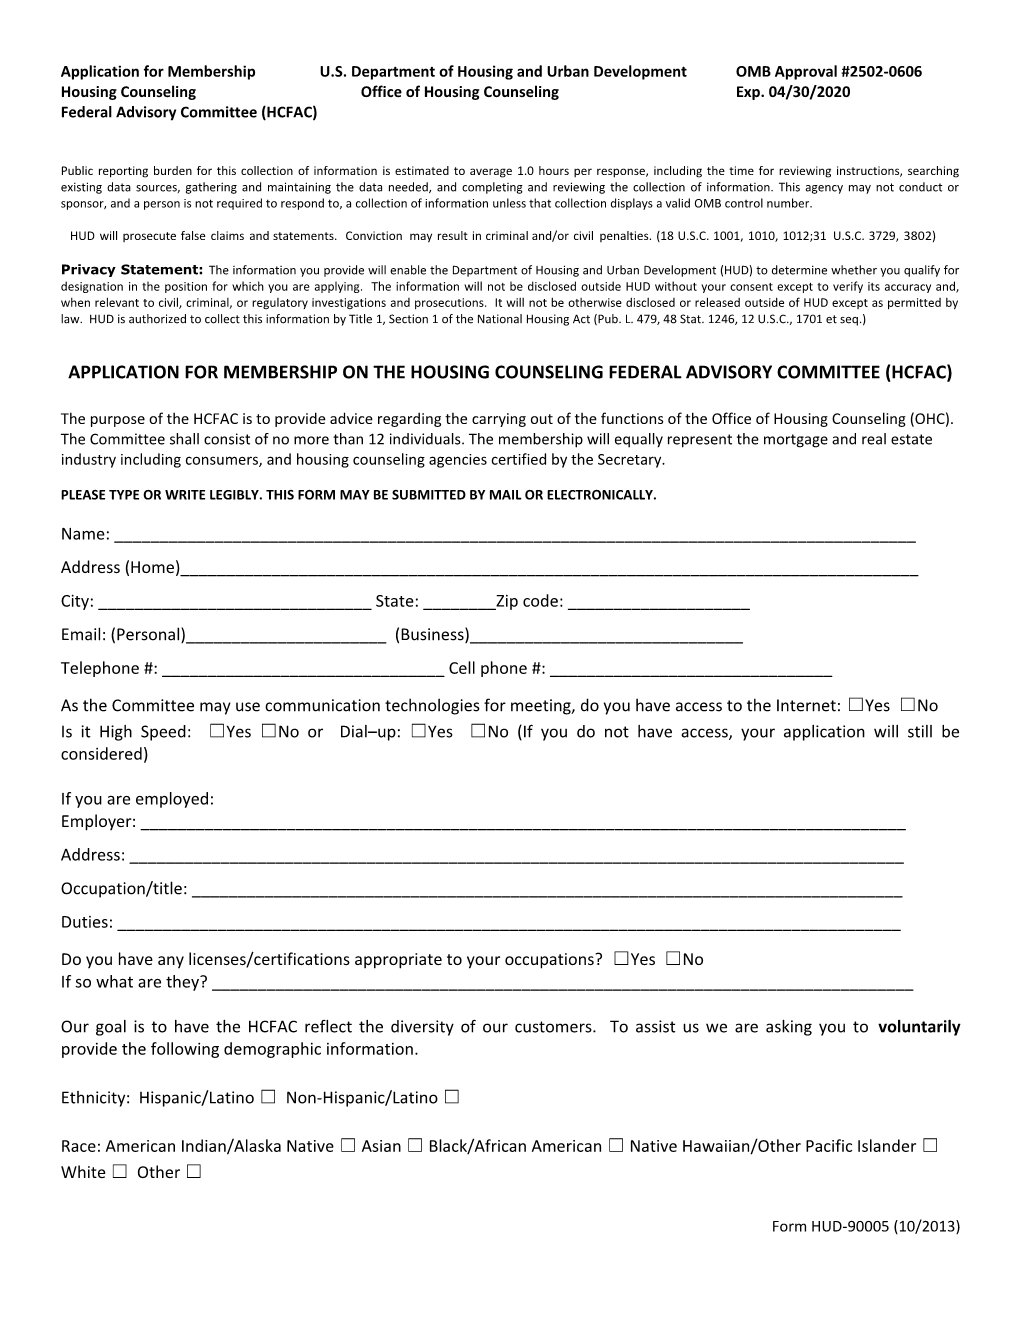 Application for Membership U.S. Department of Housing and Urban Development OMB Approval